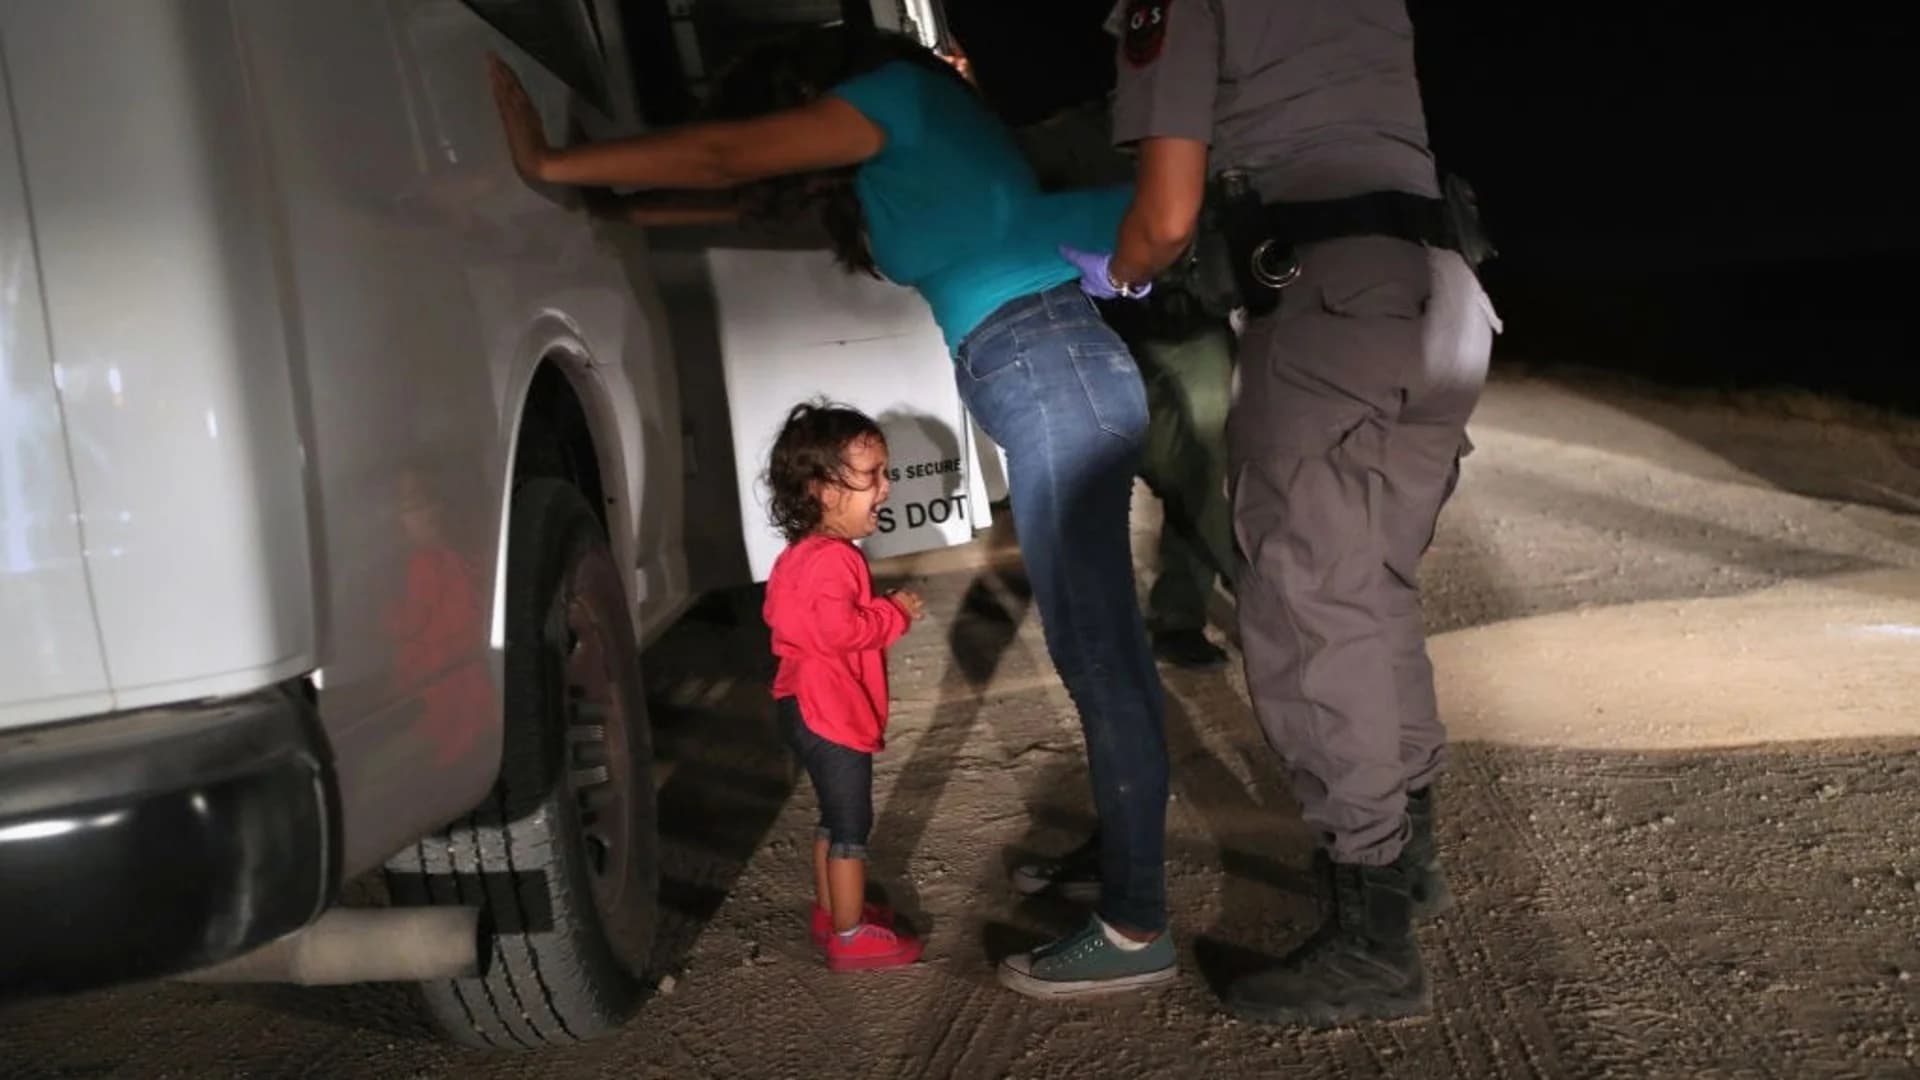 Trump says he'll be 'signing something' on detained children